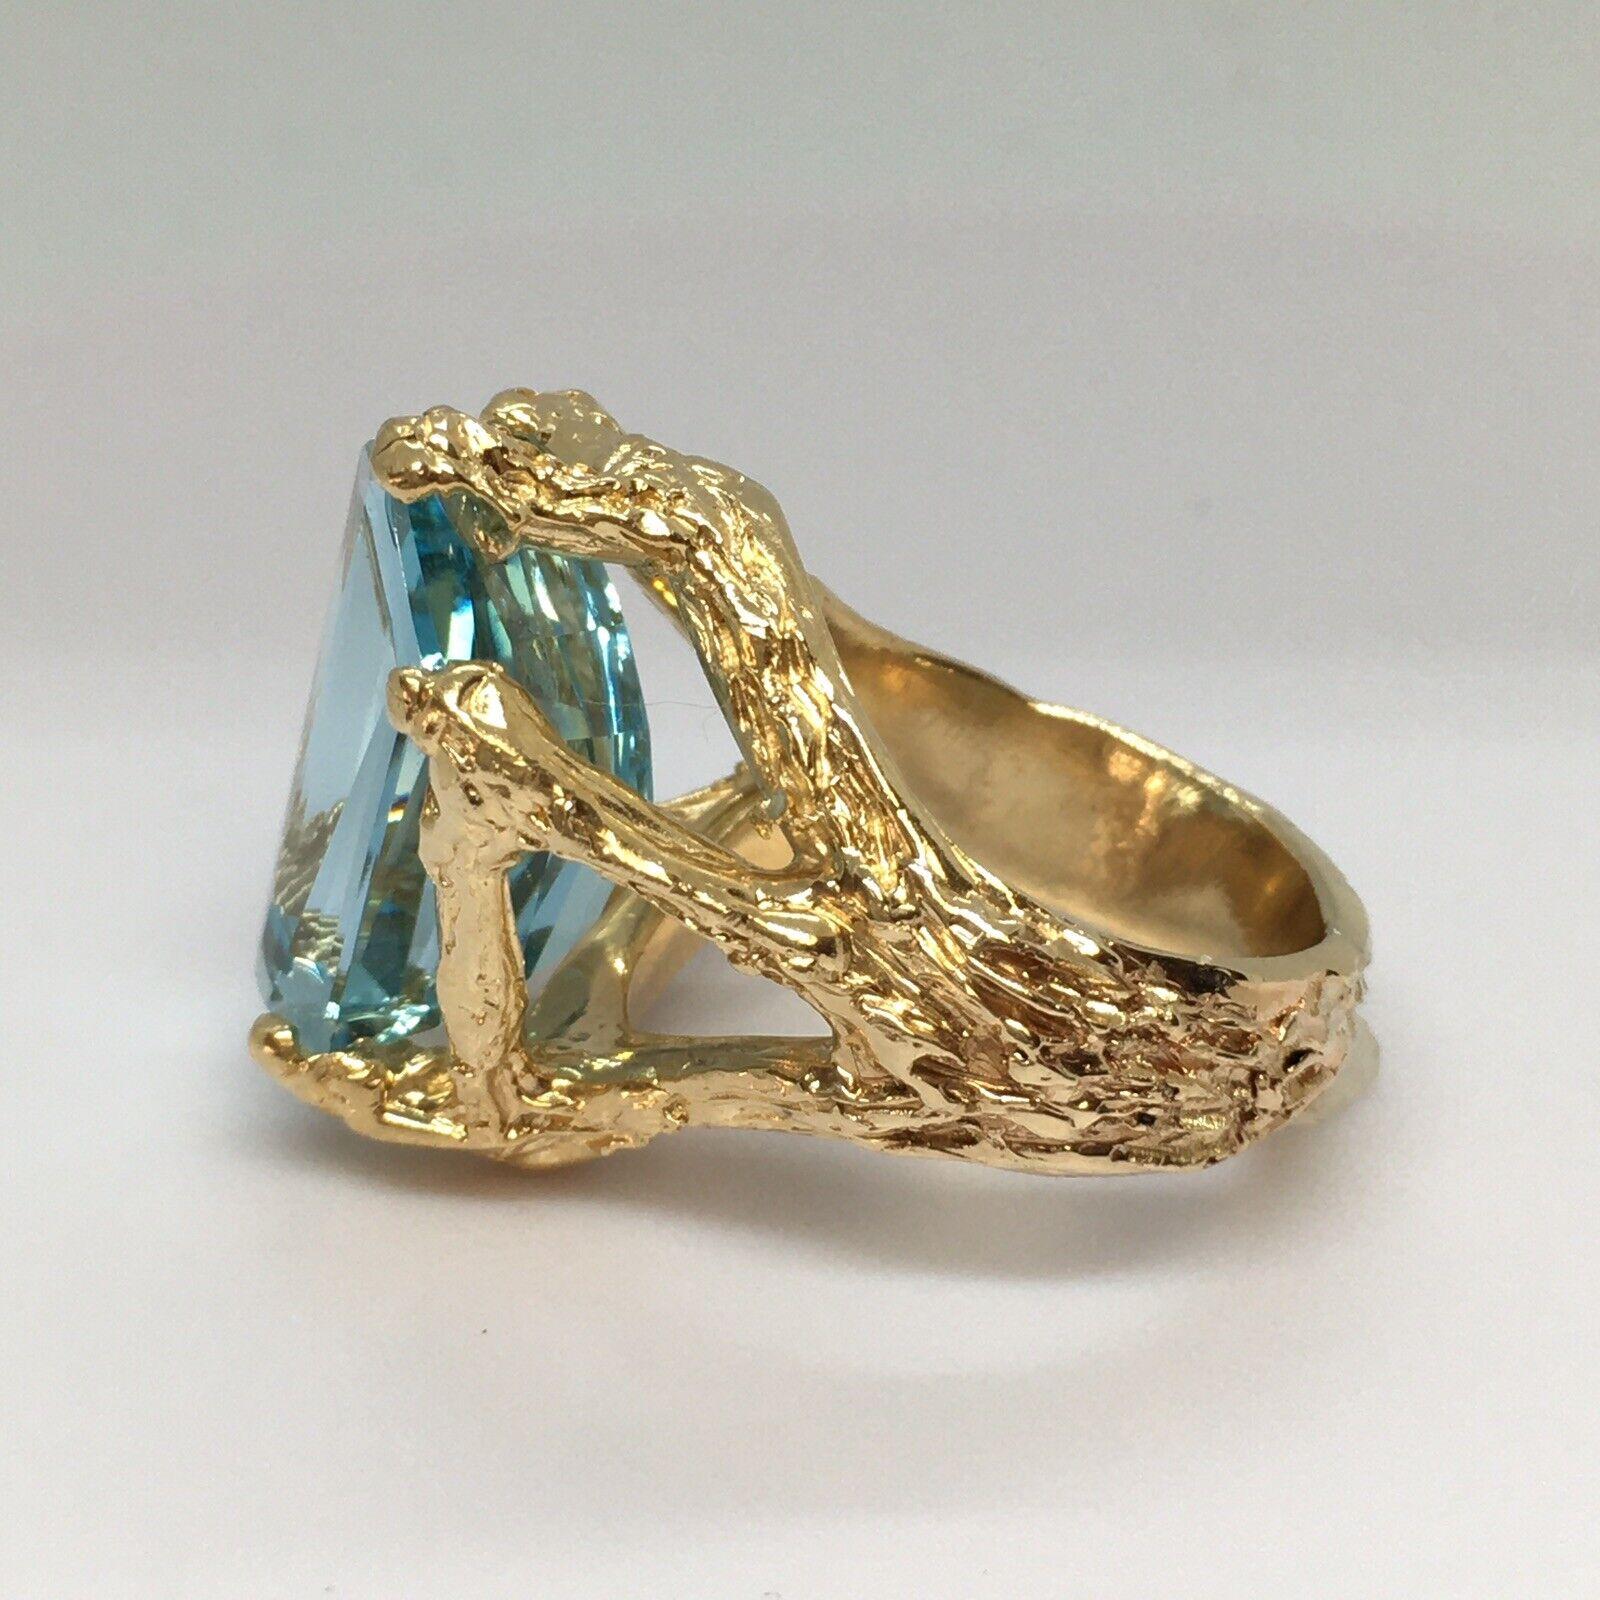 Unique Fancy Shape  14K Gold Natural  Aquamarine 1980s Cocktail Ring

Weighting 15.9 gram
Marked 